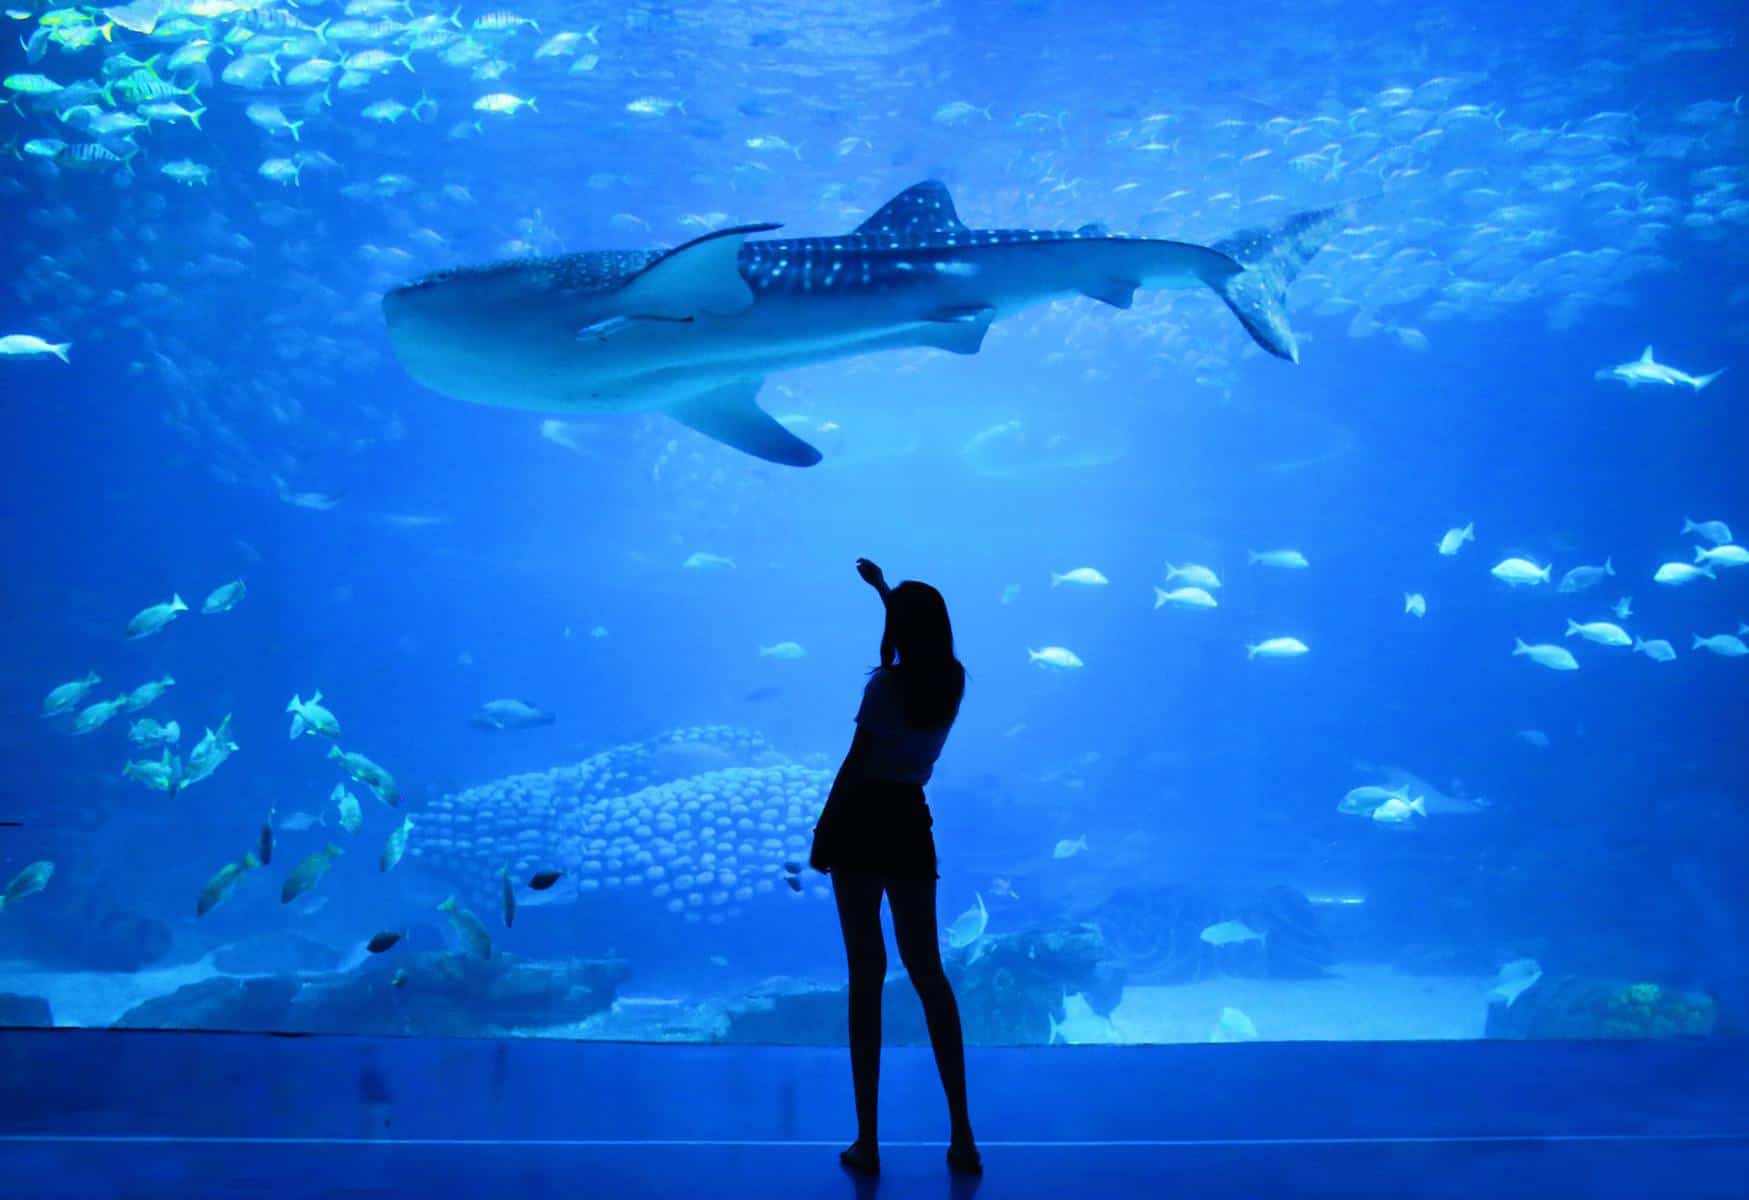 largest aquariums in the world